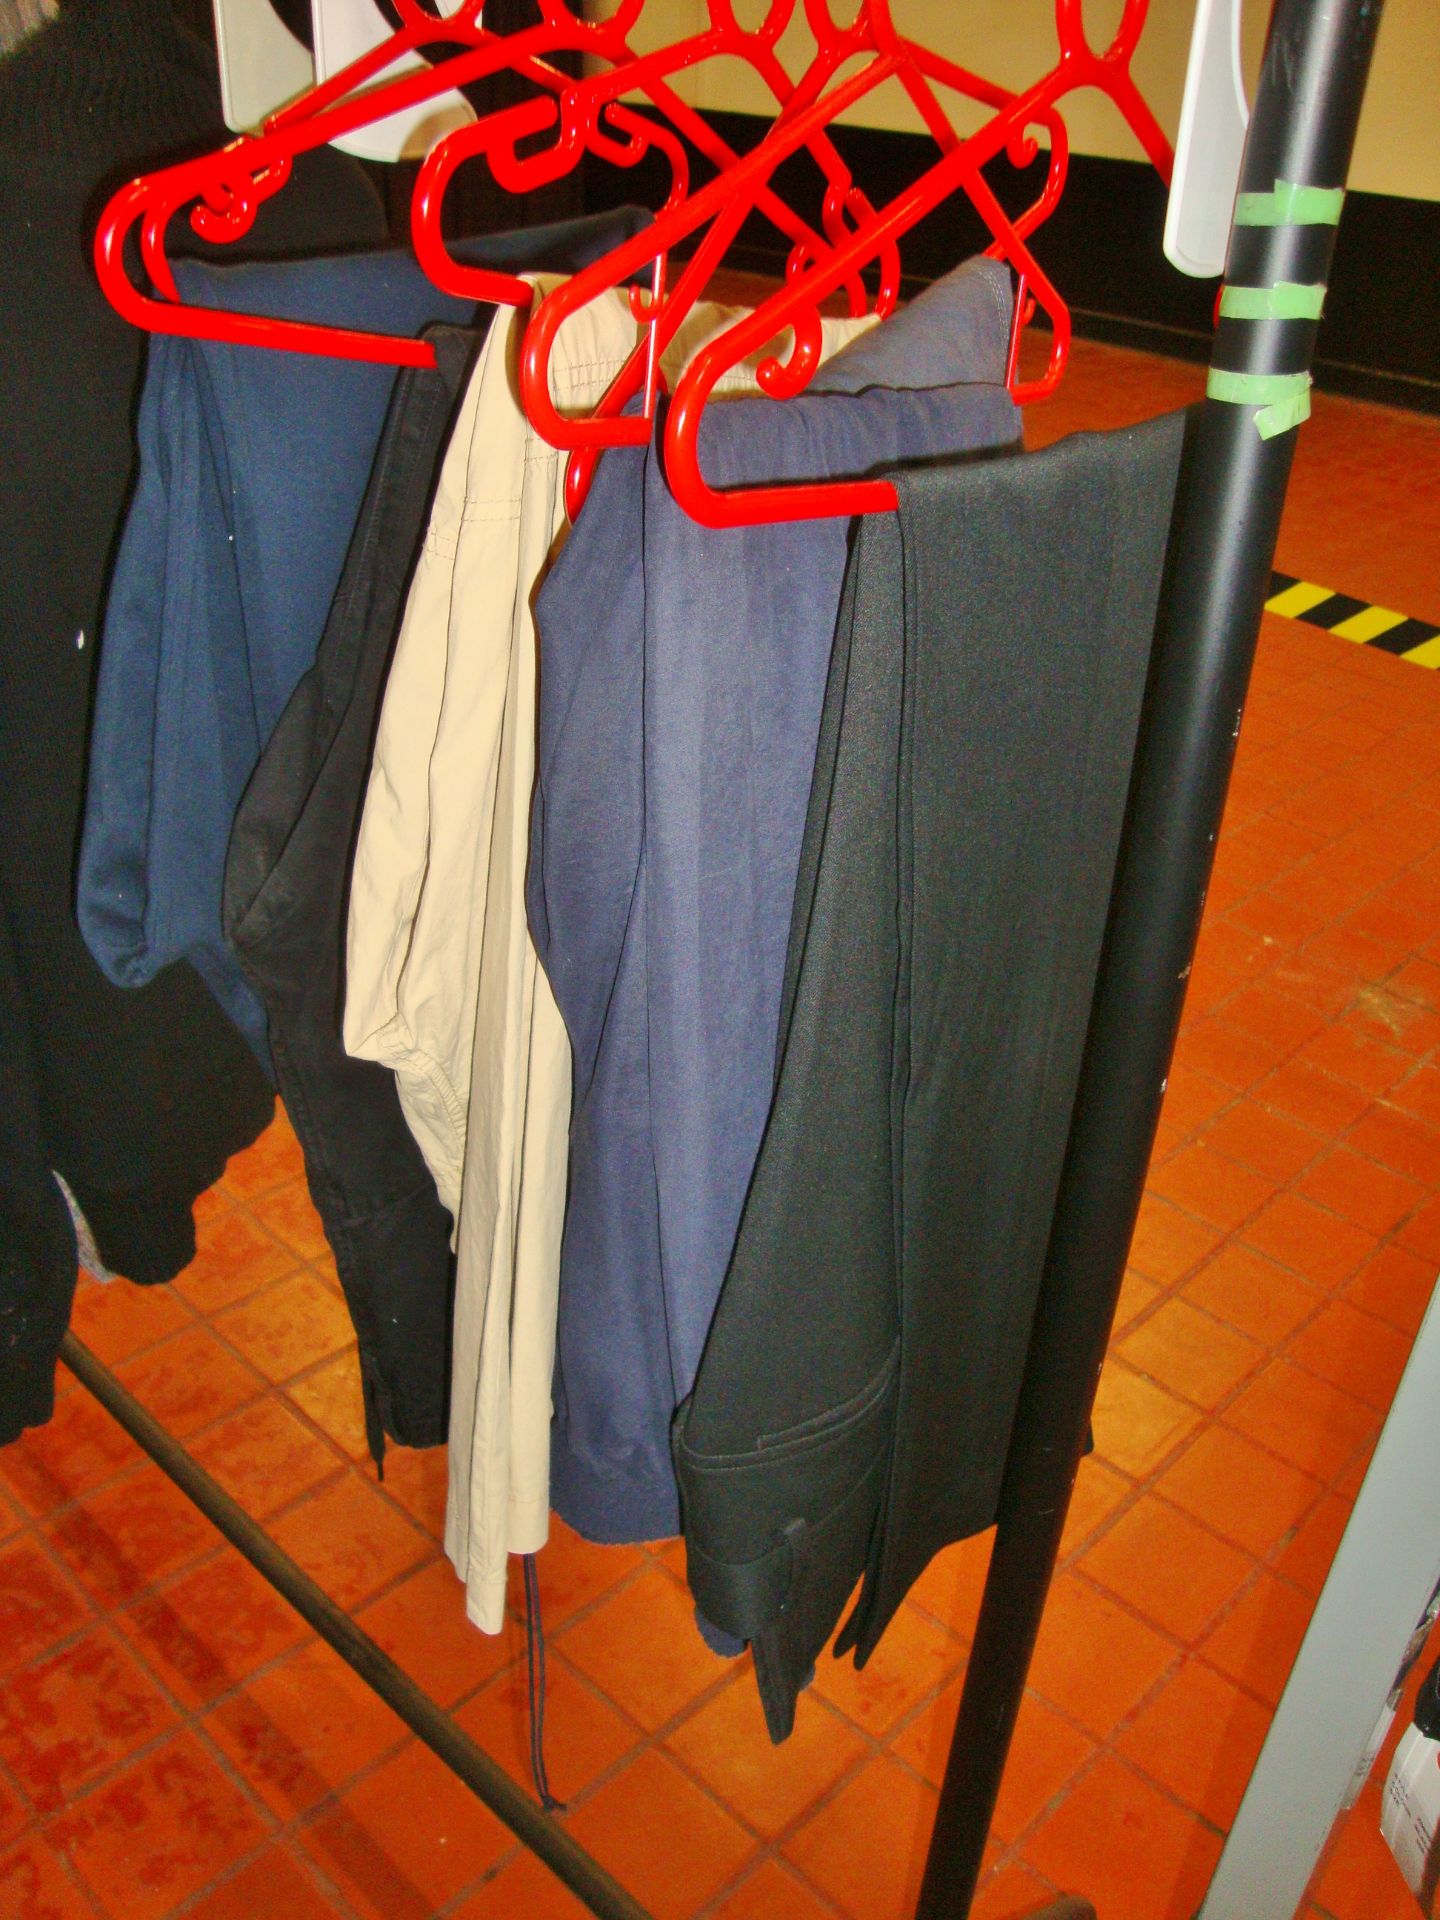 6 assorted pairs of trousers and pants by assorted brands including Moschino, Stone Island, etc - Image 2 of 4